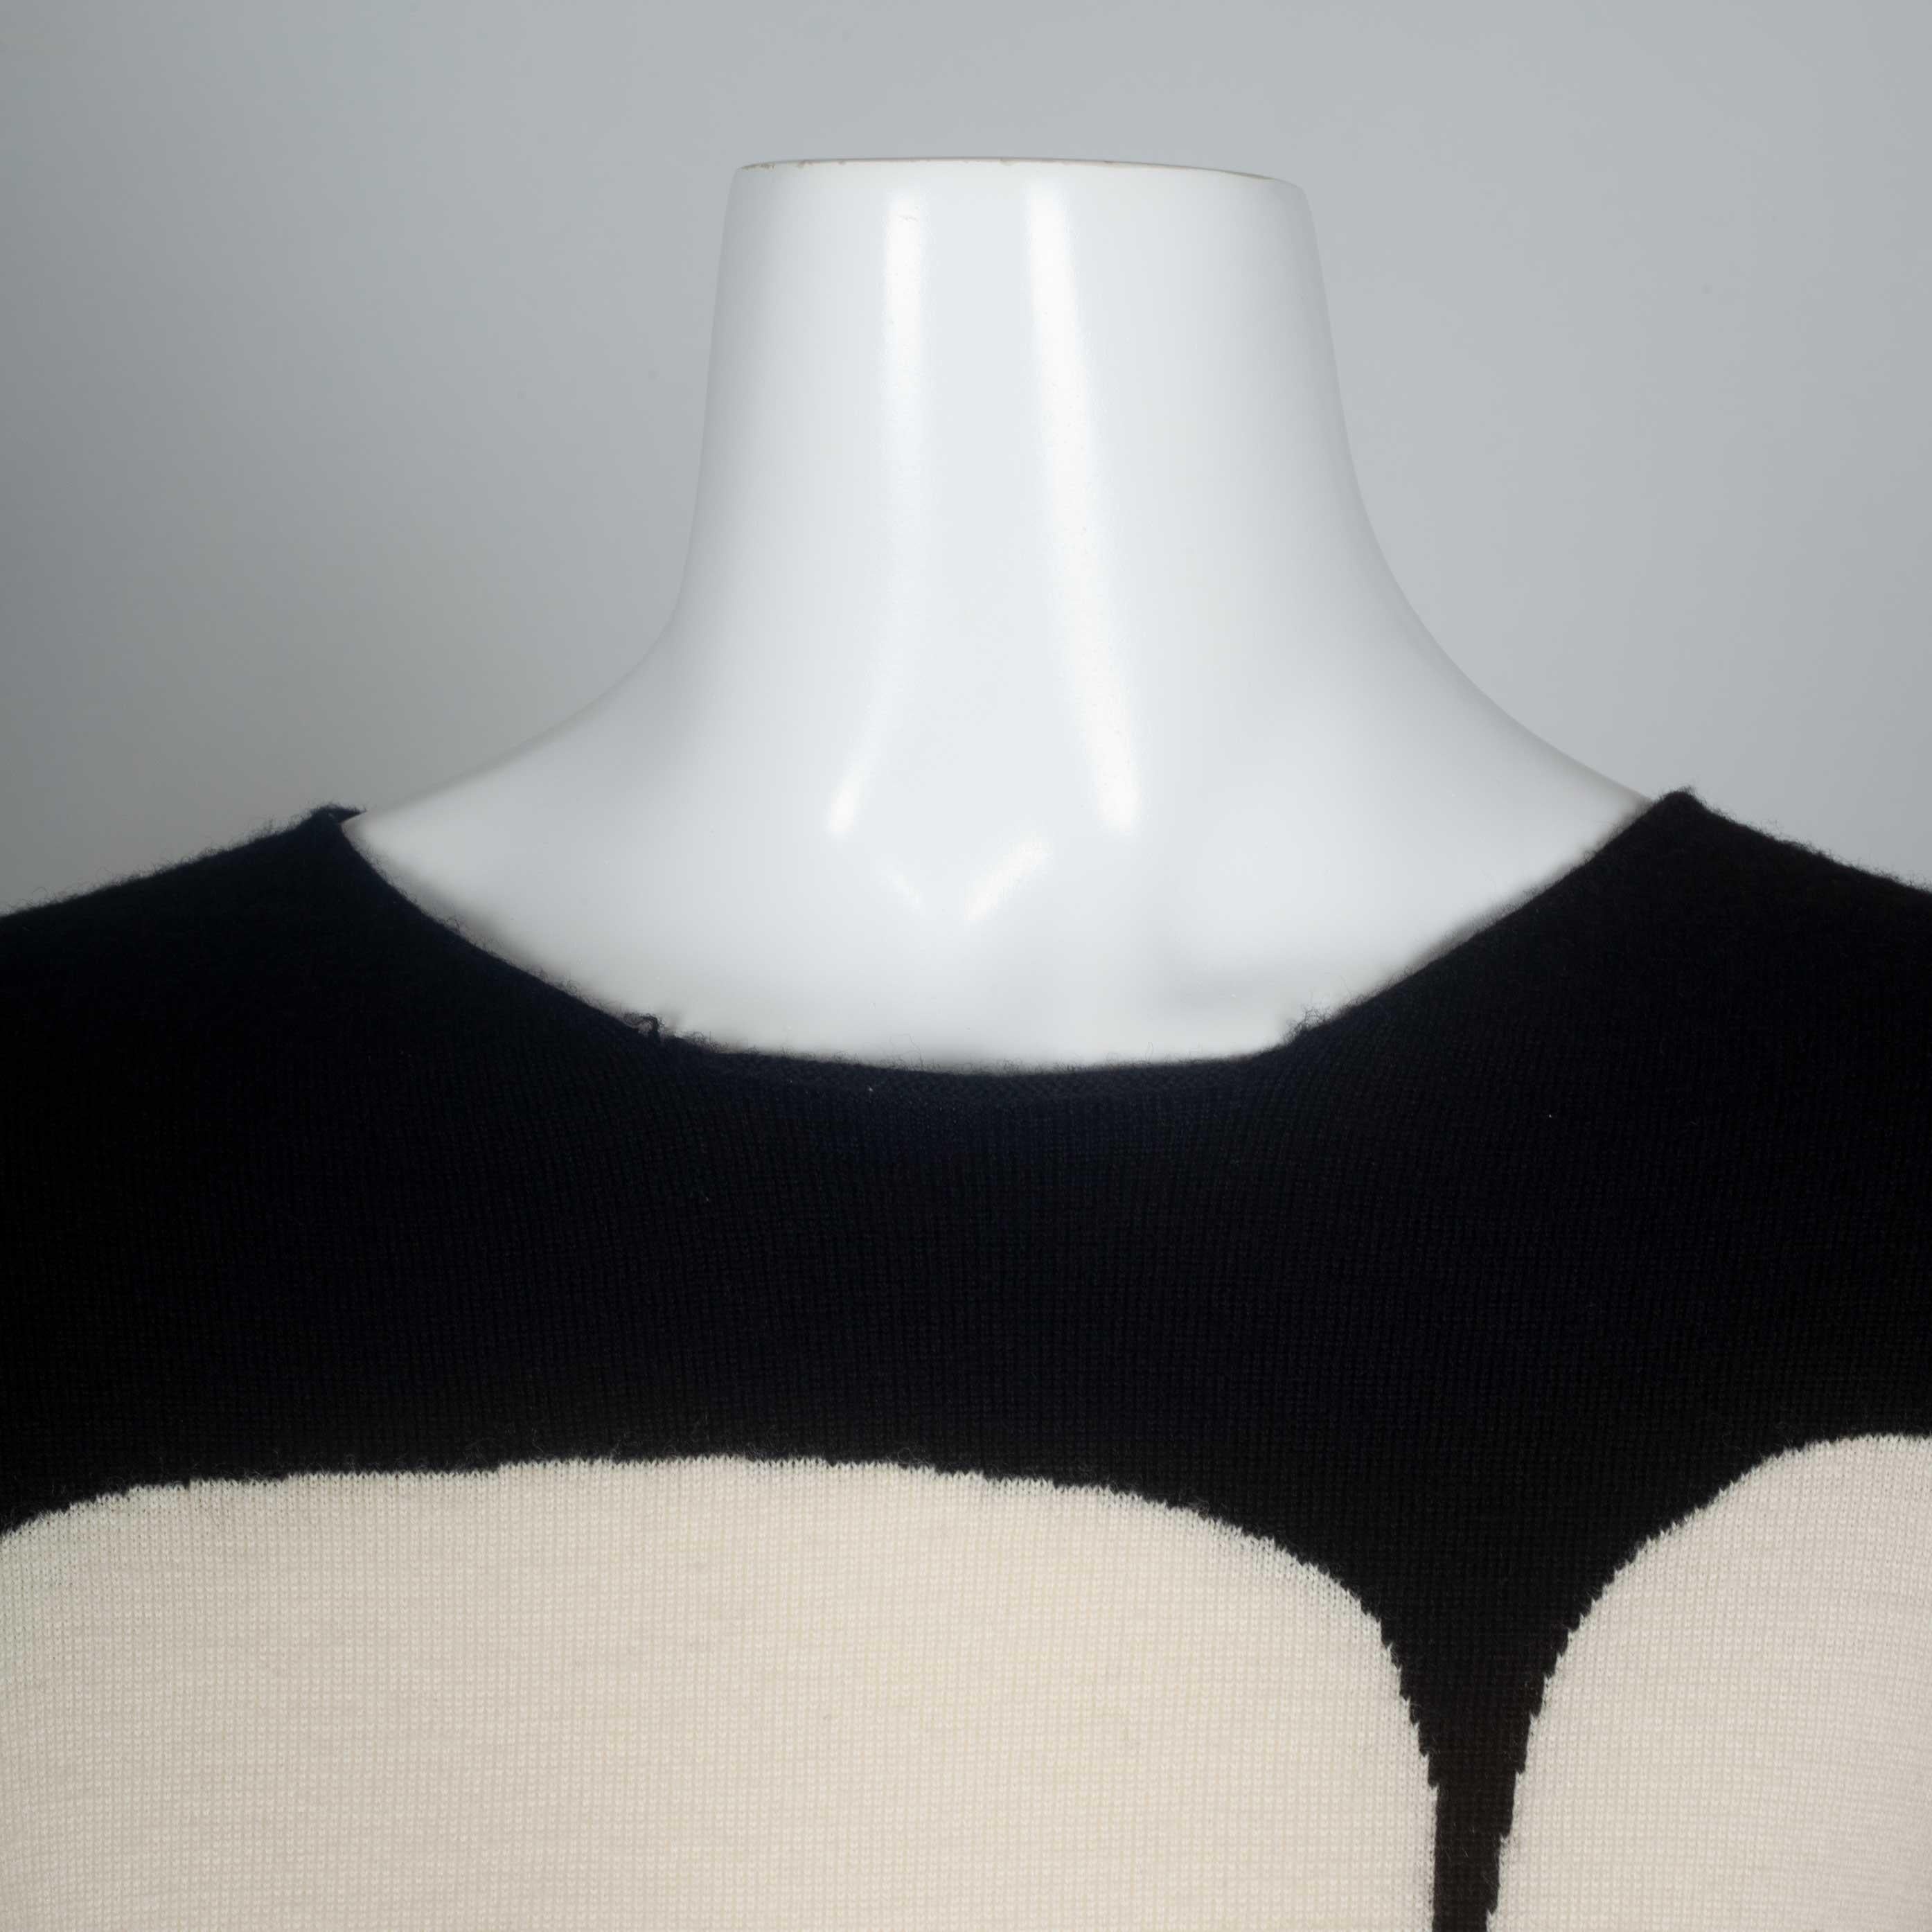 Beige Comme des Garcons Wool Sweater with Abstract Shapes